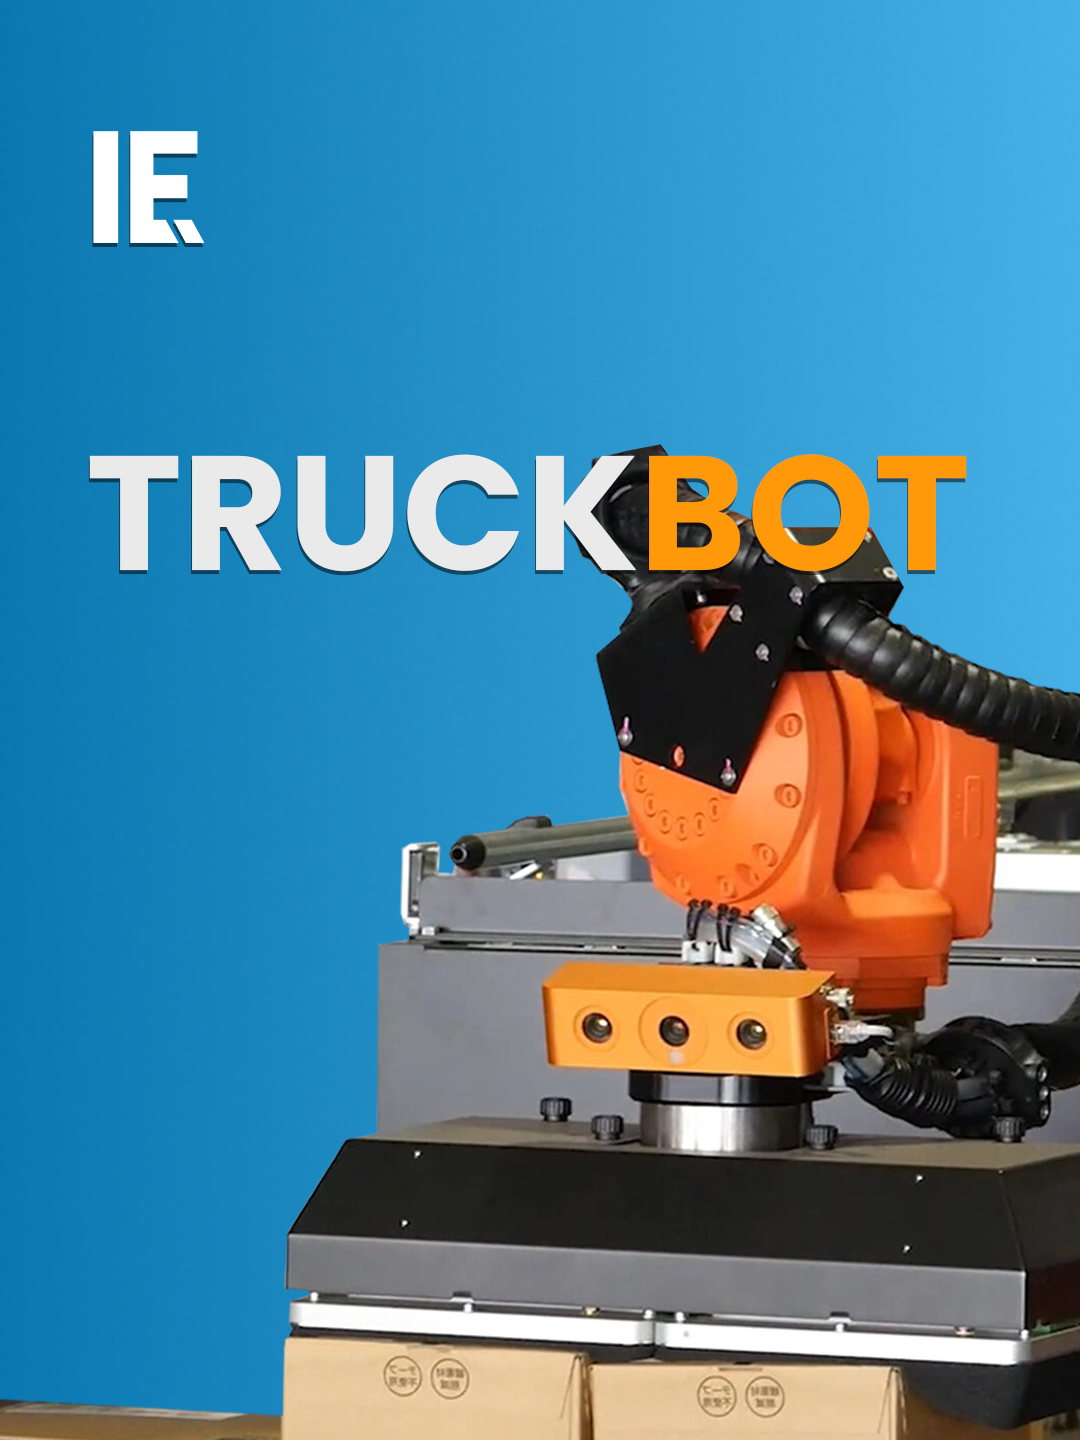 Unloading in warehouses has always been a human job, steeped in history. Now the TruckBot, from Mujin Corp, may be about to change that. With its integrated picker and conveyor combination, the TruckBot streamlines warehousing processes. #WarehouseAutomation#TruckBot#MujinCorp